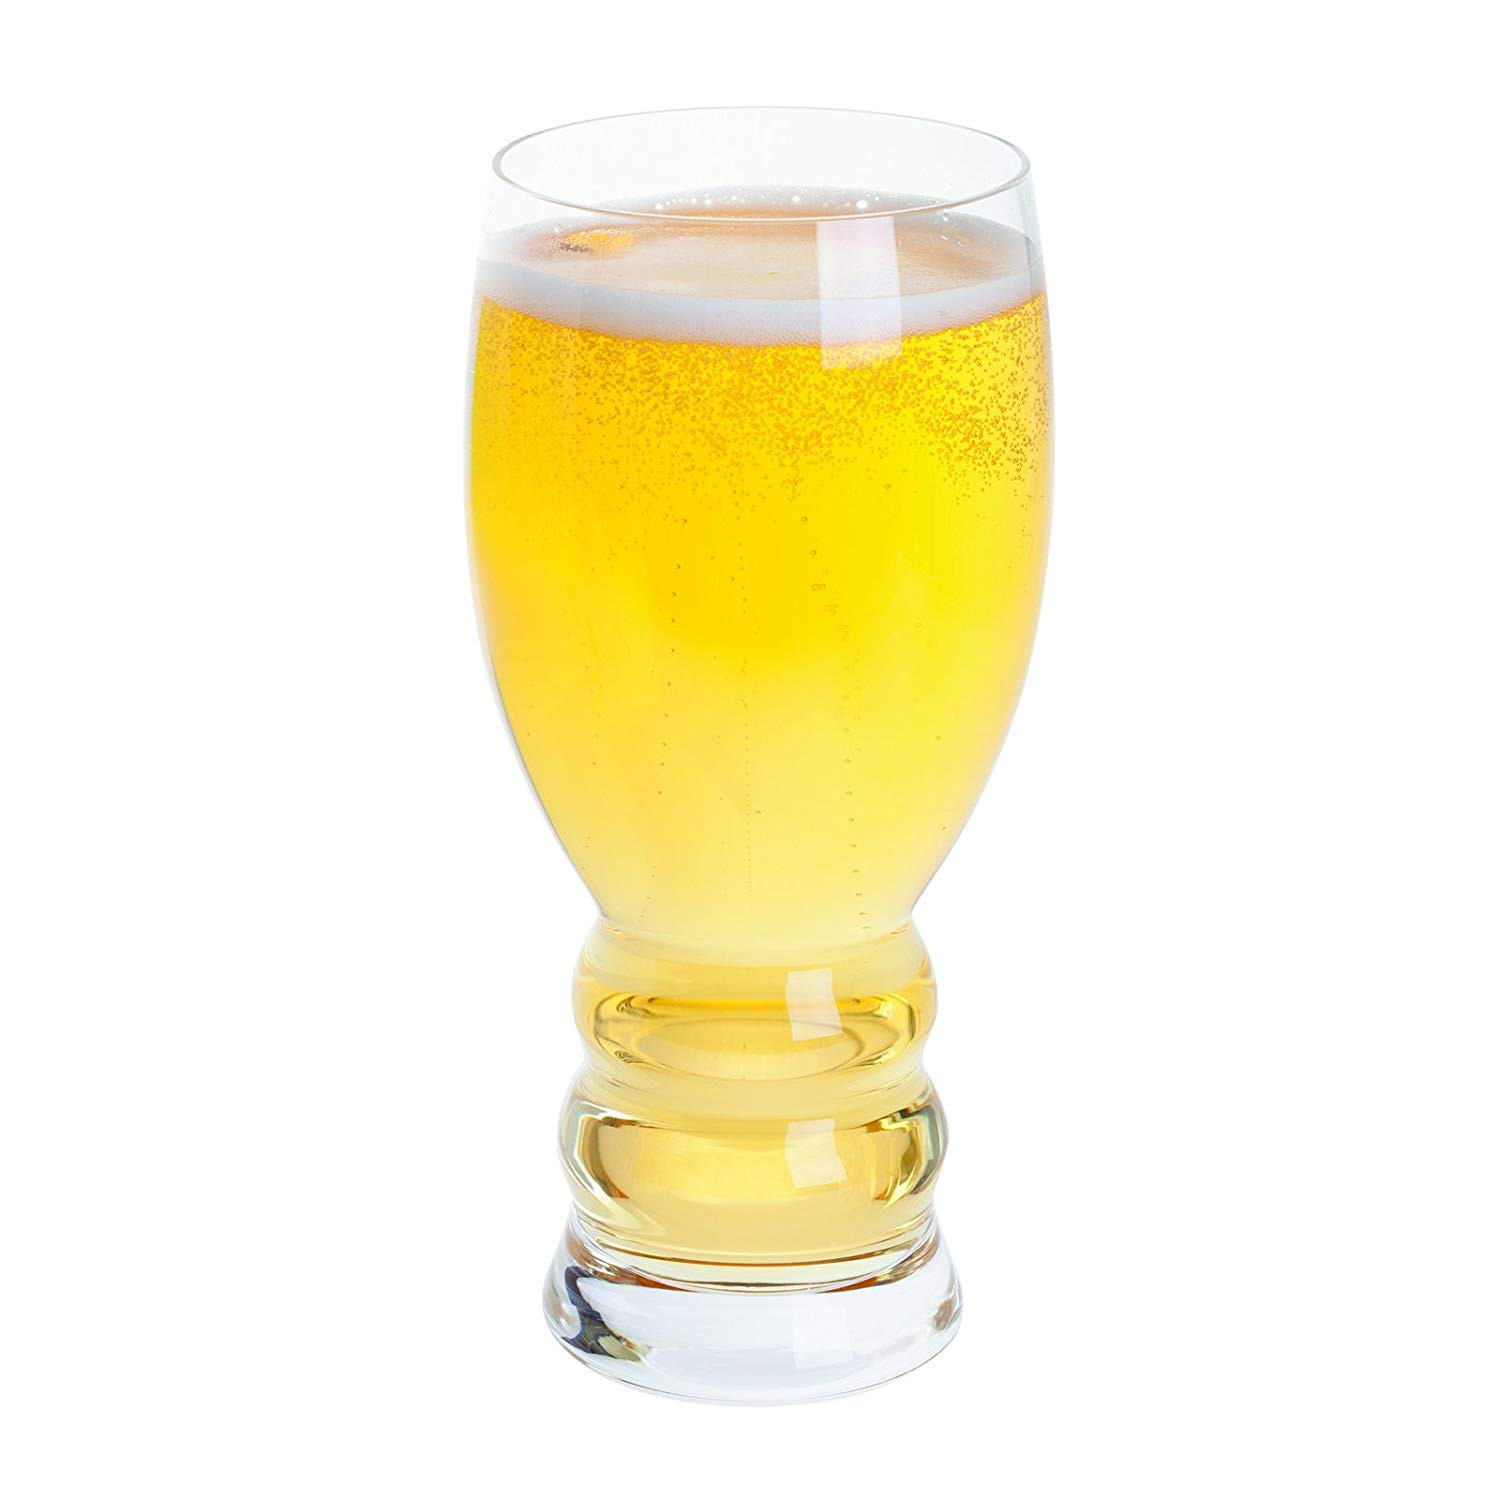 15 Fashionable Tall Pilsner Glass Vases 2024 free download tall pilsner glass vases of dartington crystal brew pint glass for craft cider lager beer 520ml intended for a beautiful glass made by dartington so you know you will be getting the best qua